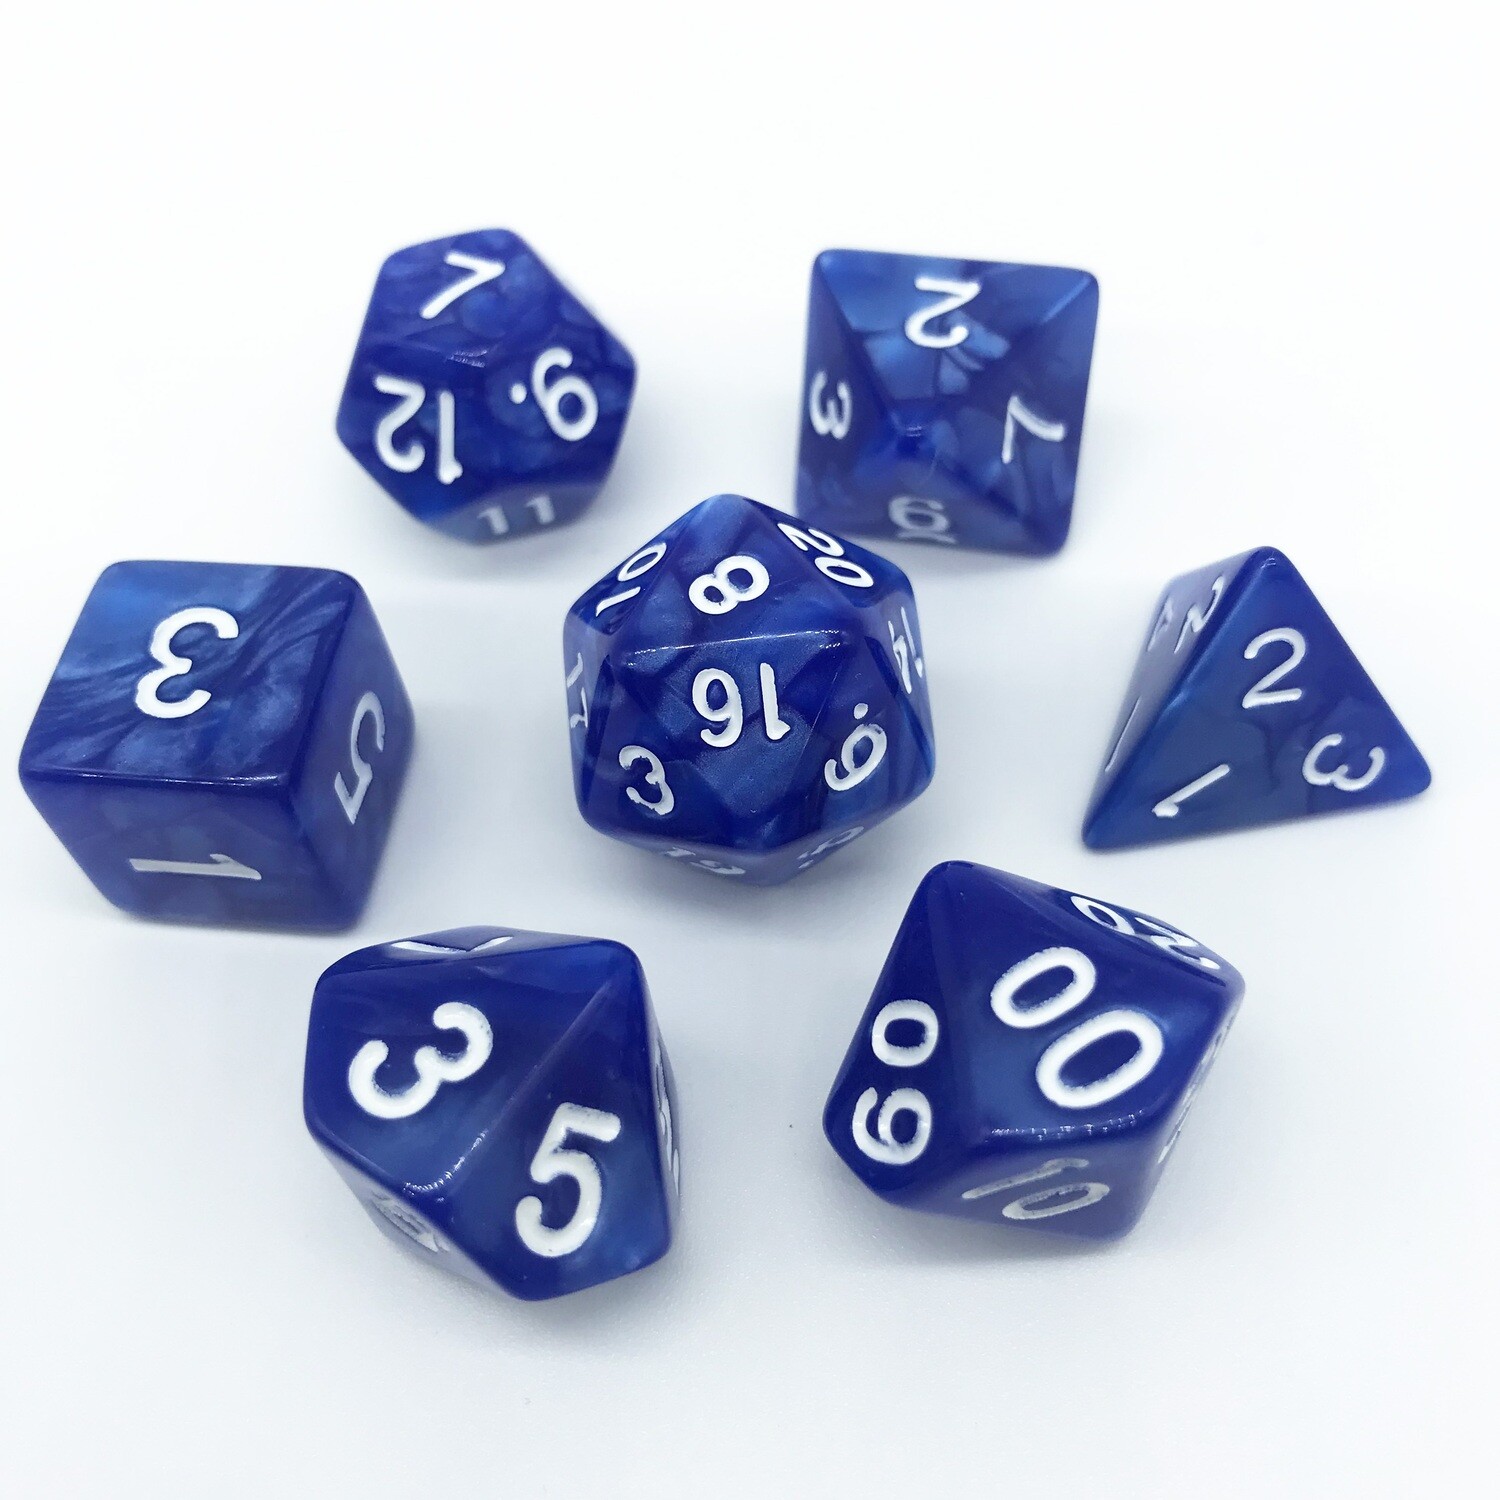 Dice Set - Blue marbled with white numbers